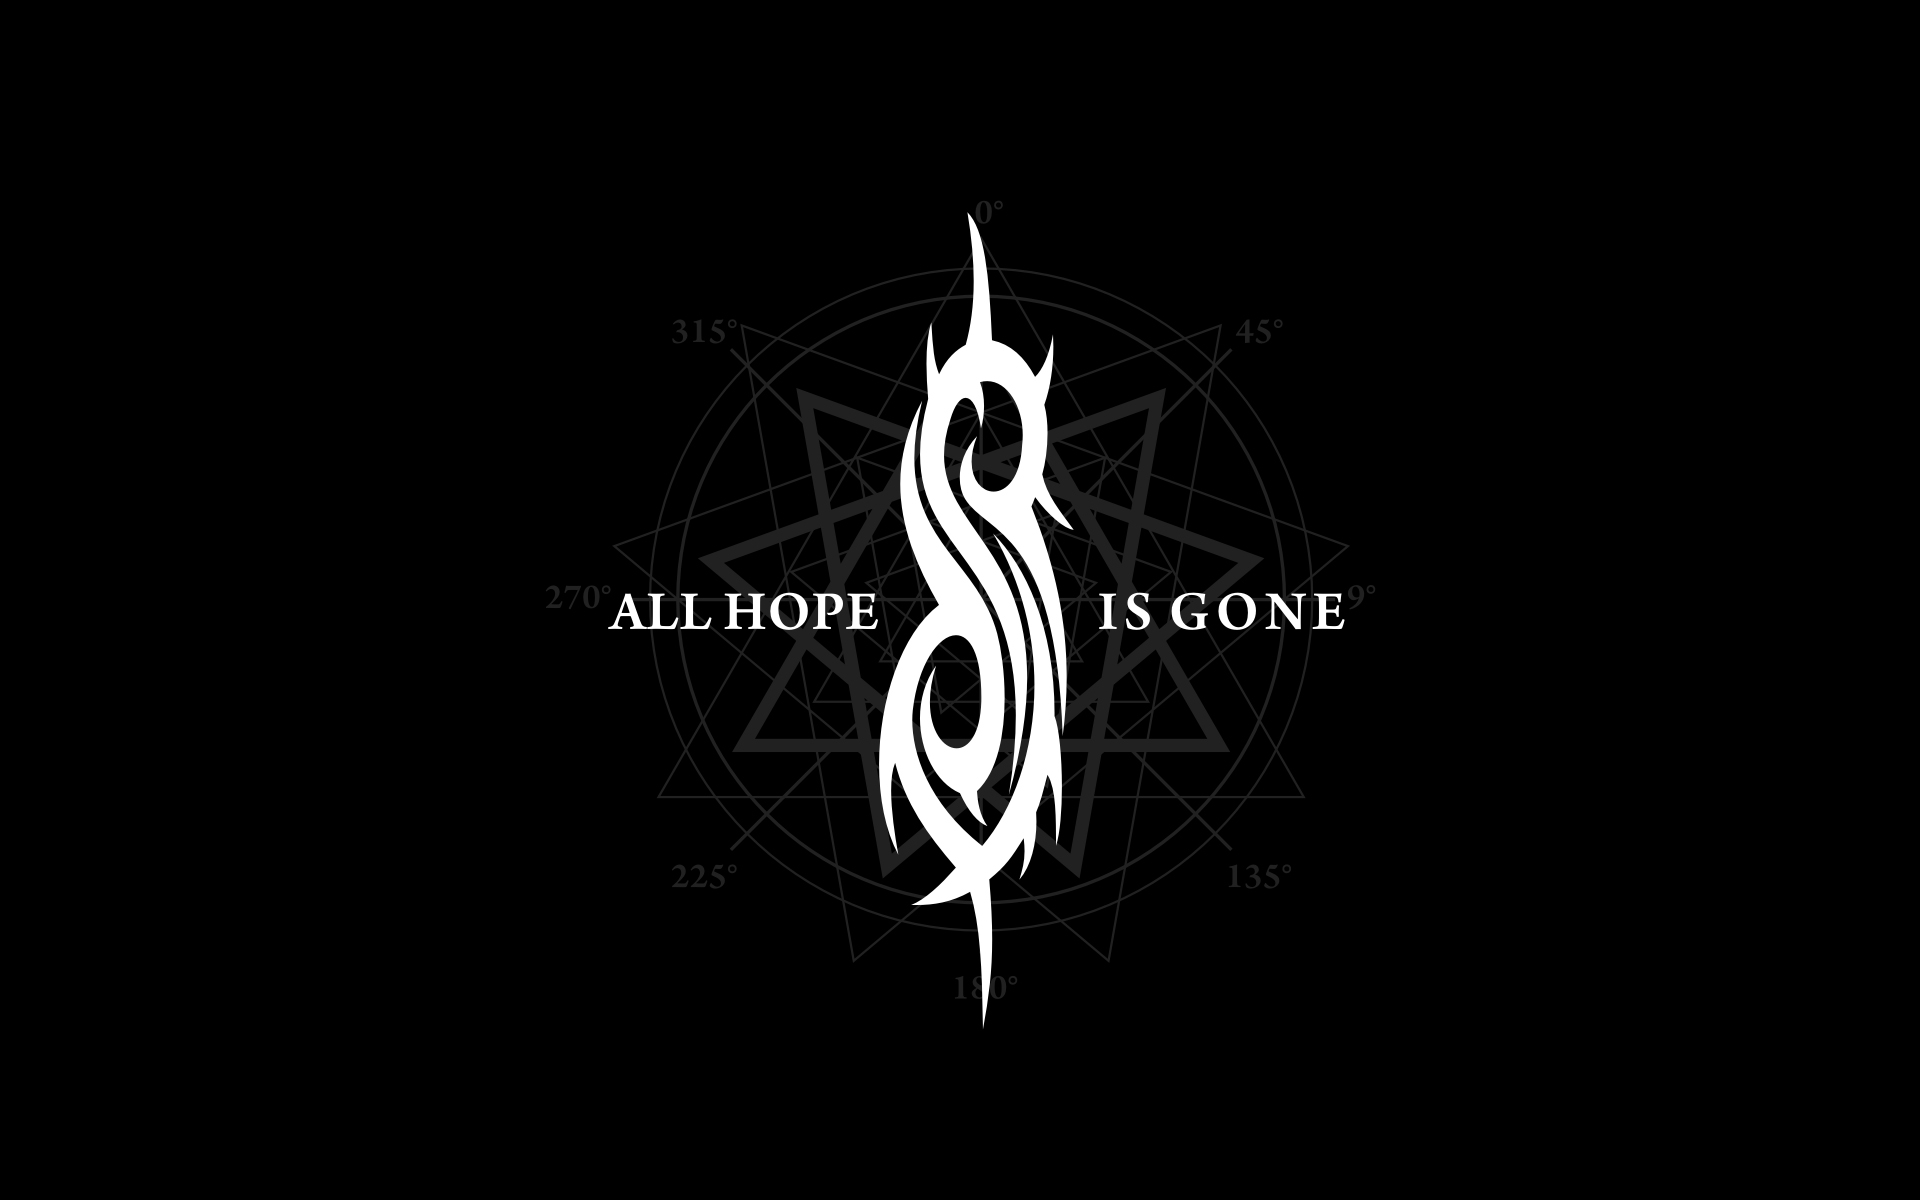 cool art slipknot fondos all hope is gone - 31 270 All Hope Is Gone 22.50 1350 To